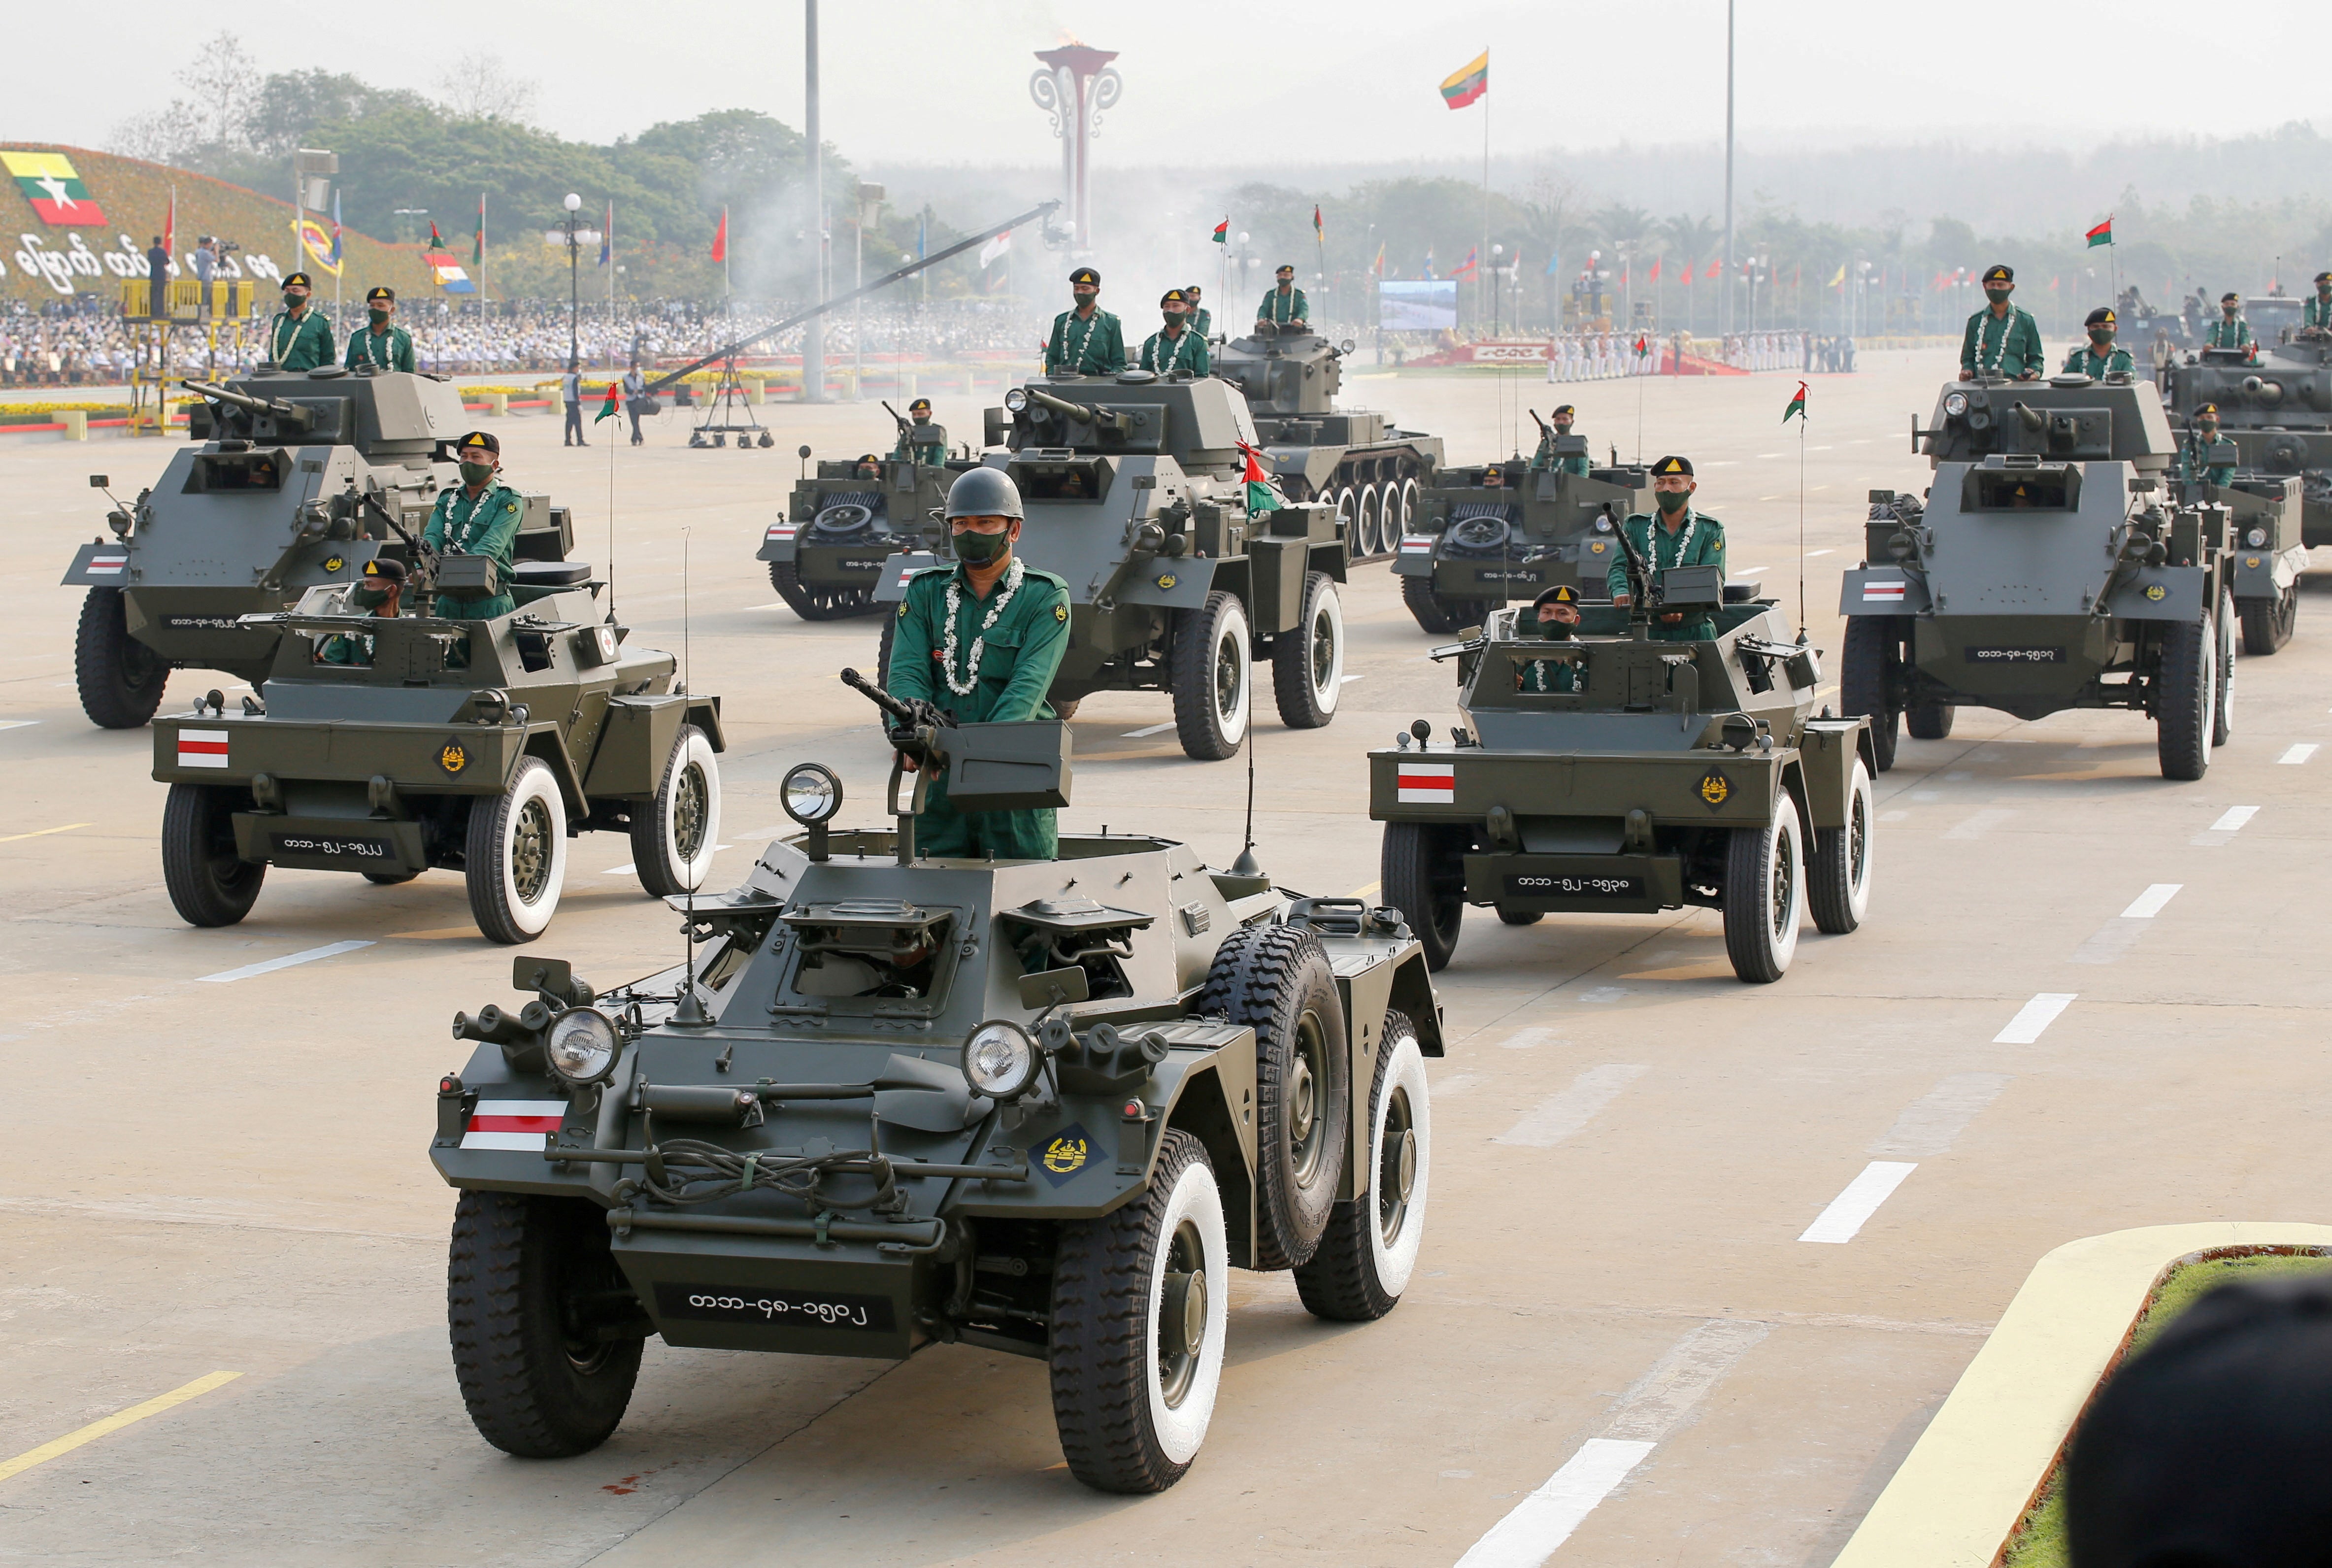 Military personnel participates in a parade on Armed Forces Day in Naypyitaw, Myanmar, March 27, 2021